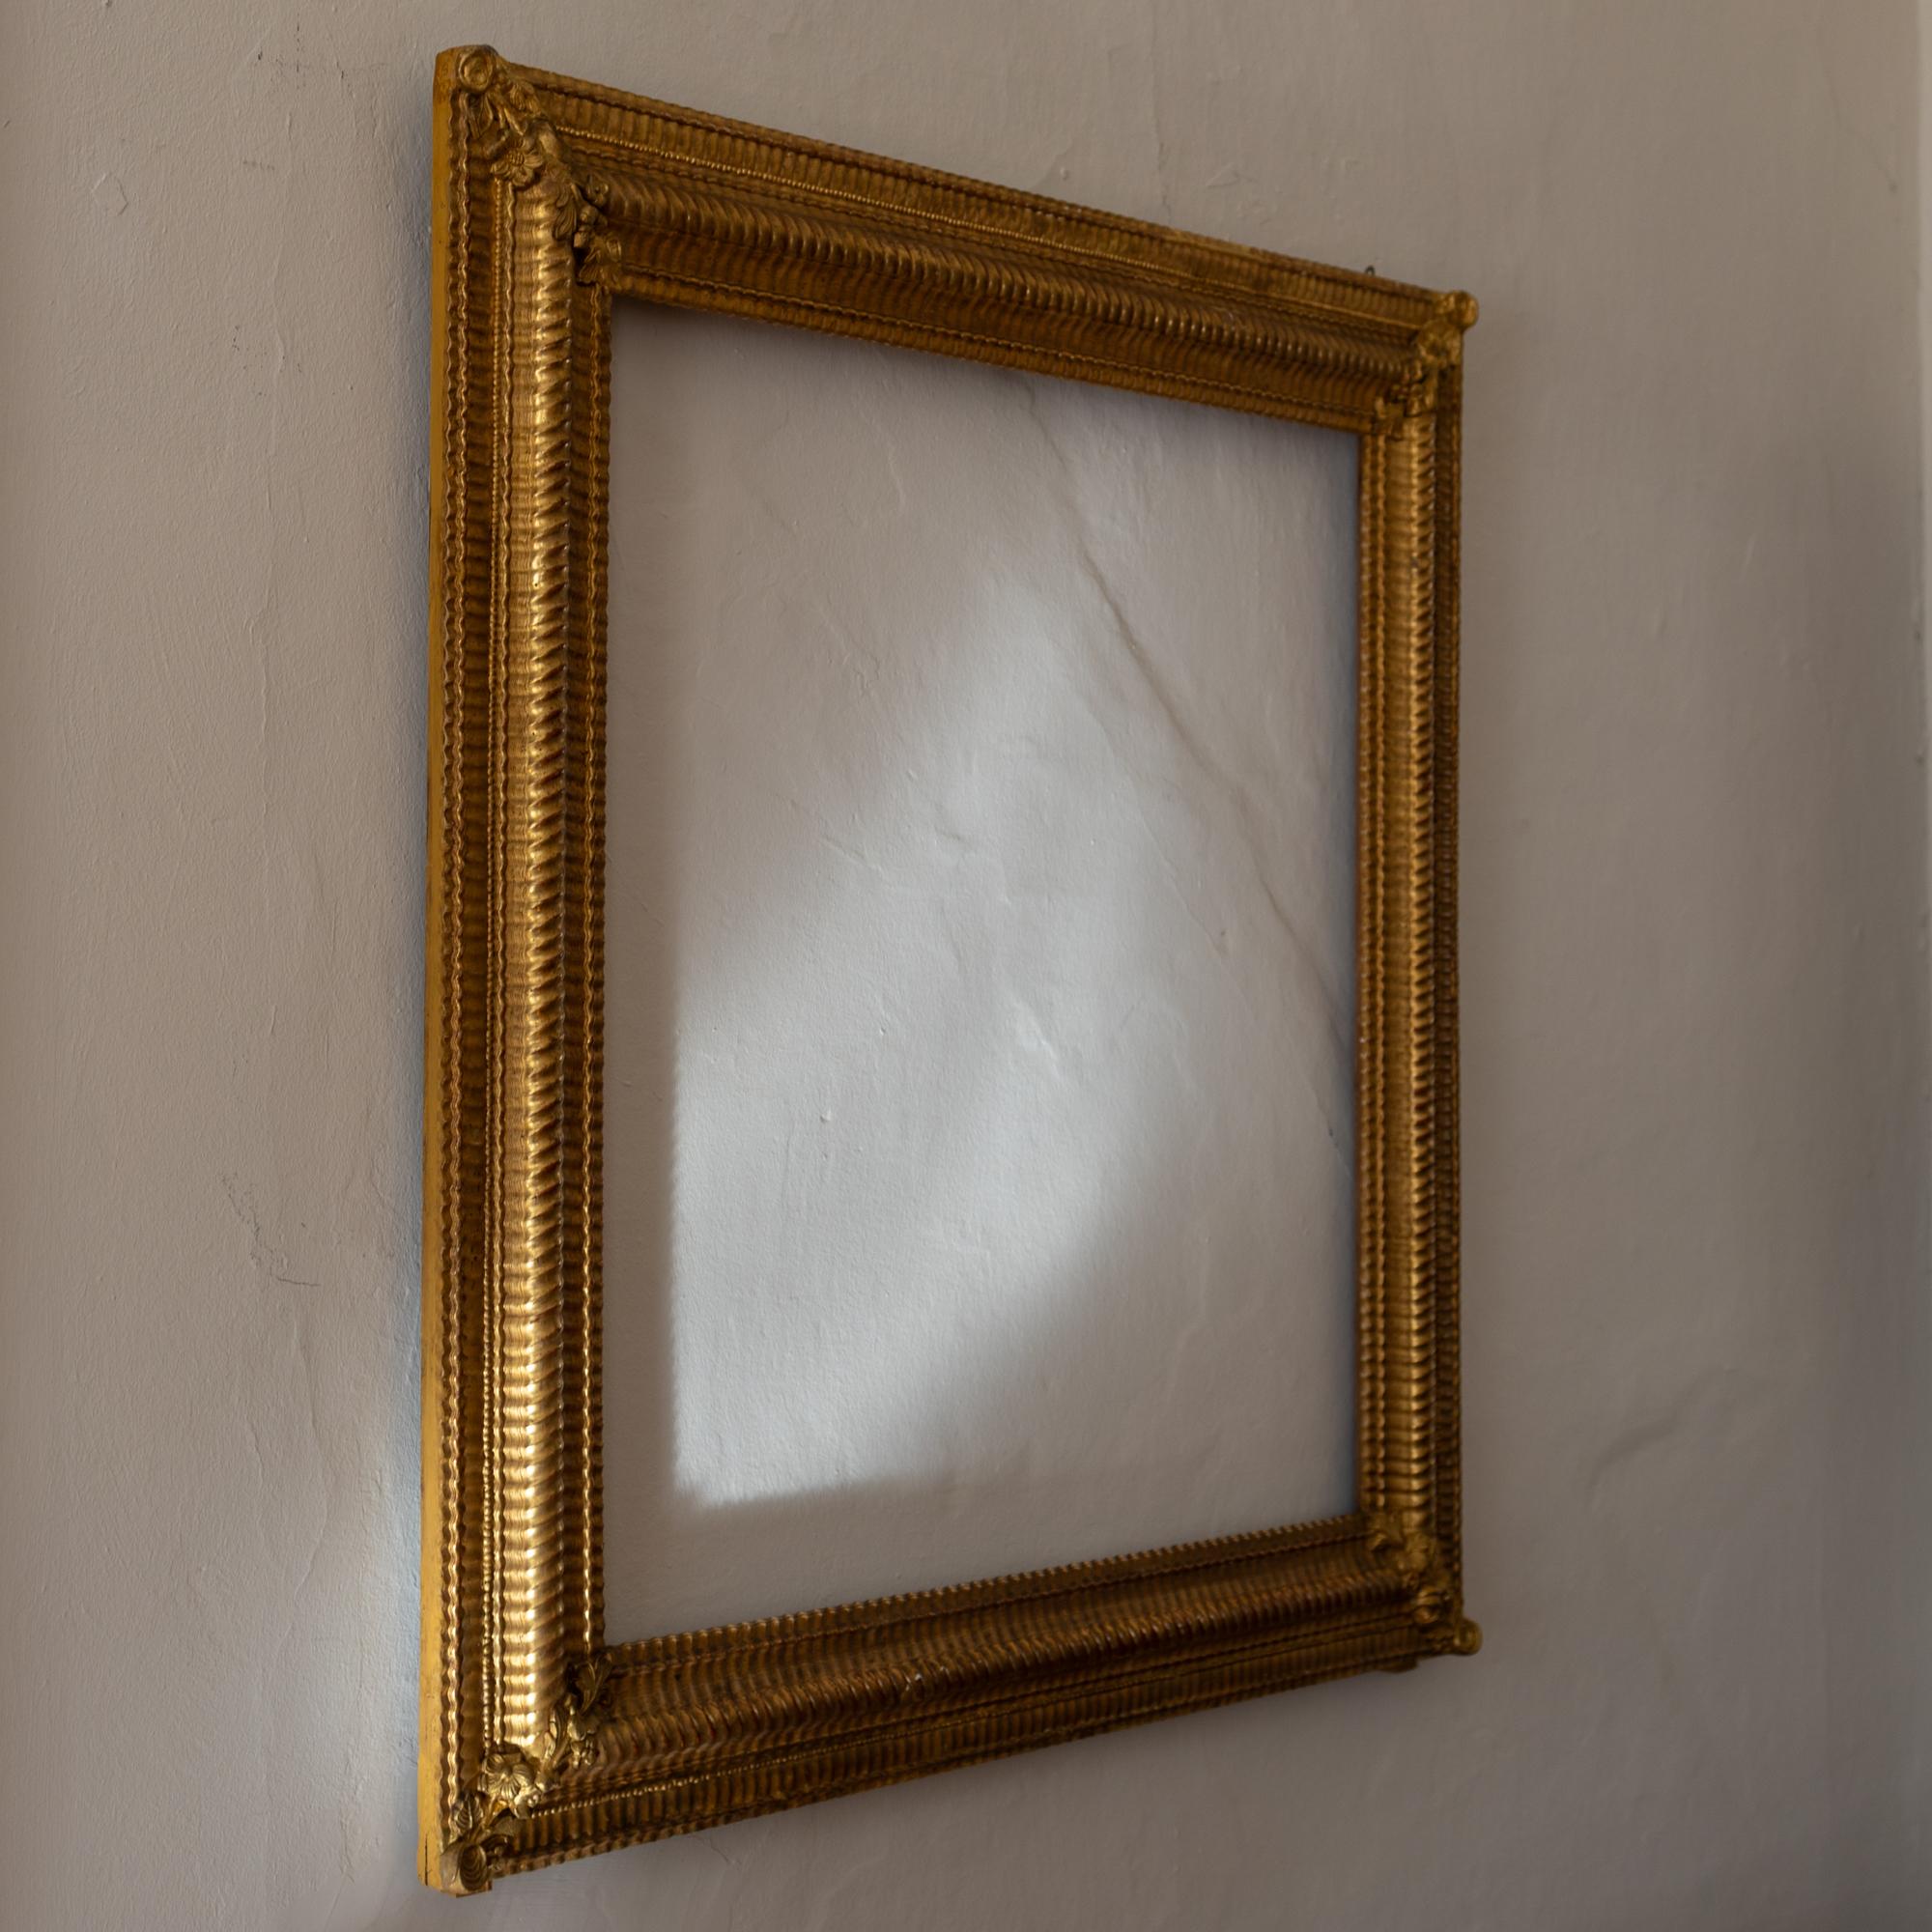 Large mirror frame made of gold patinated and stuccoed wood with floral decorations on the corners. and grooved decorations on the profiled moldings.